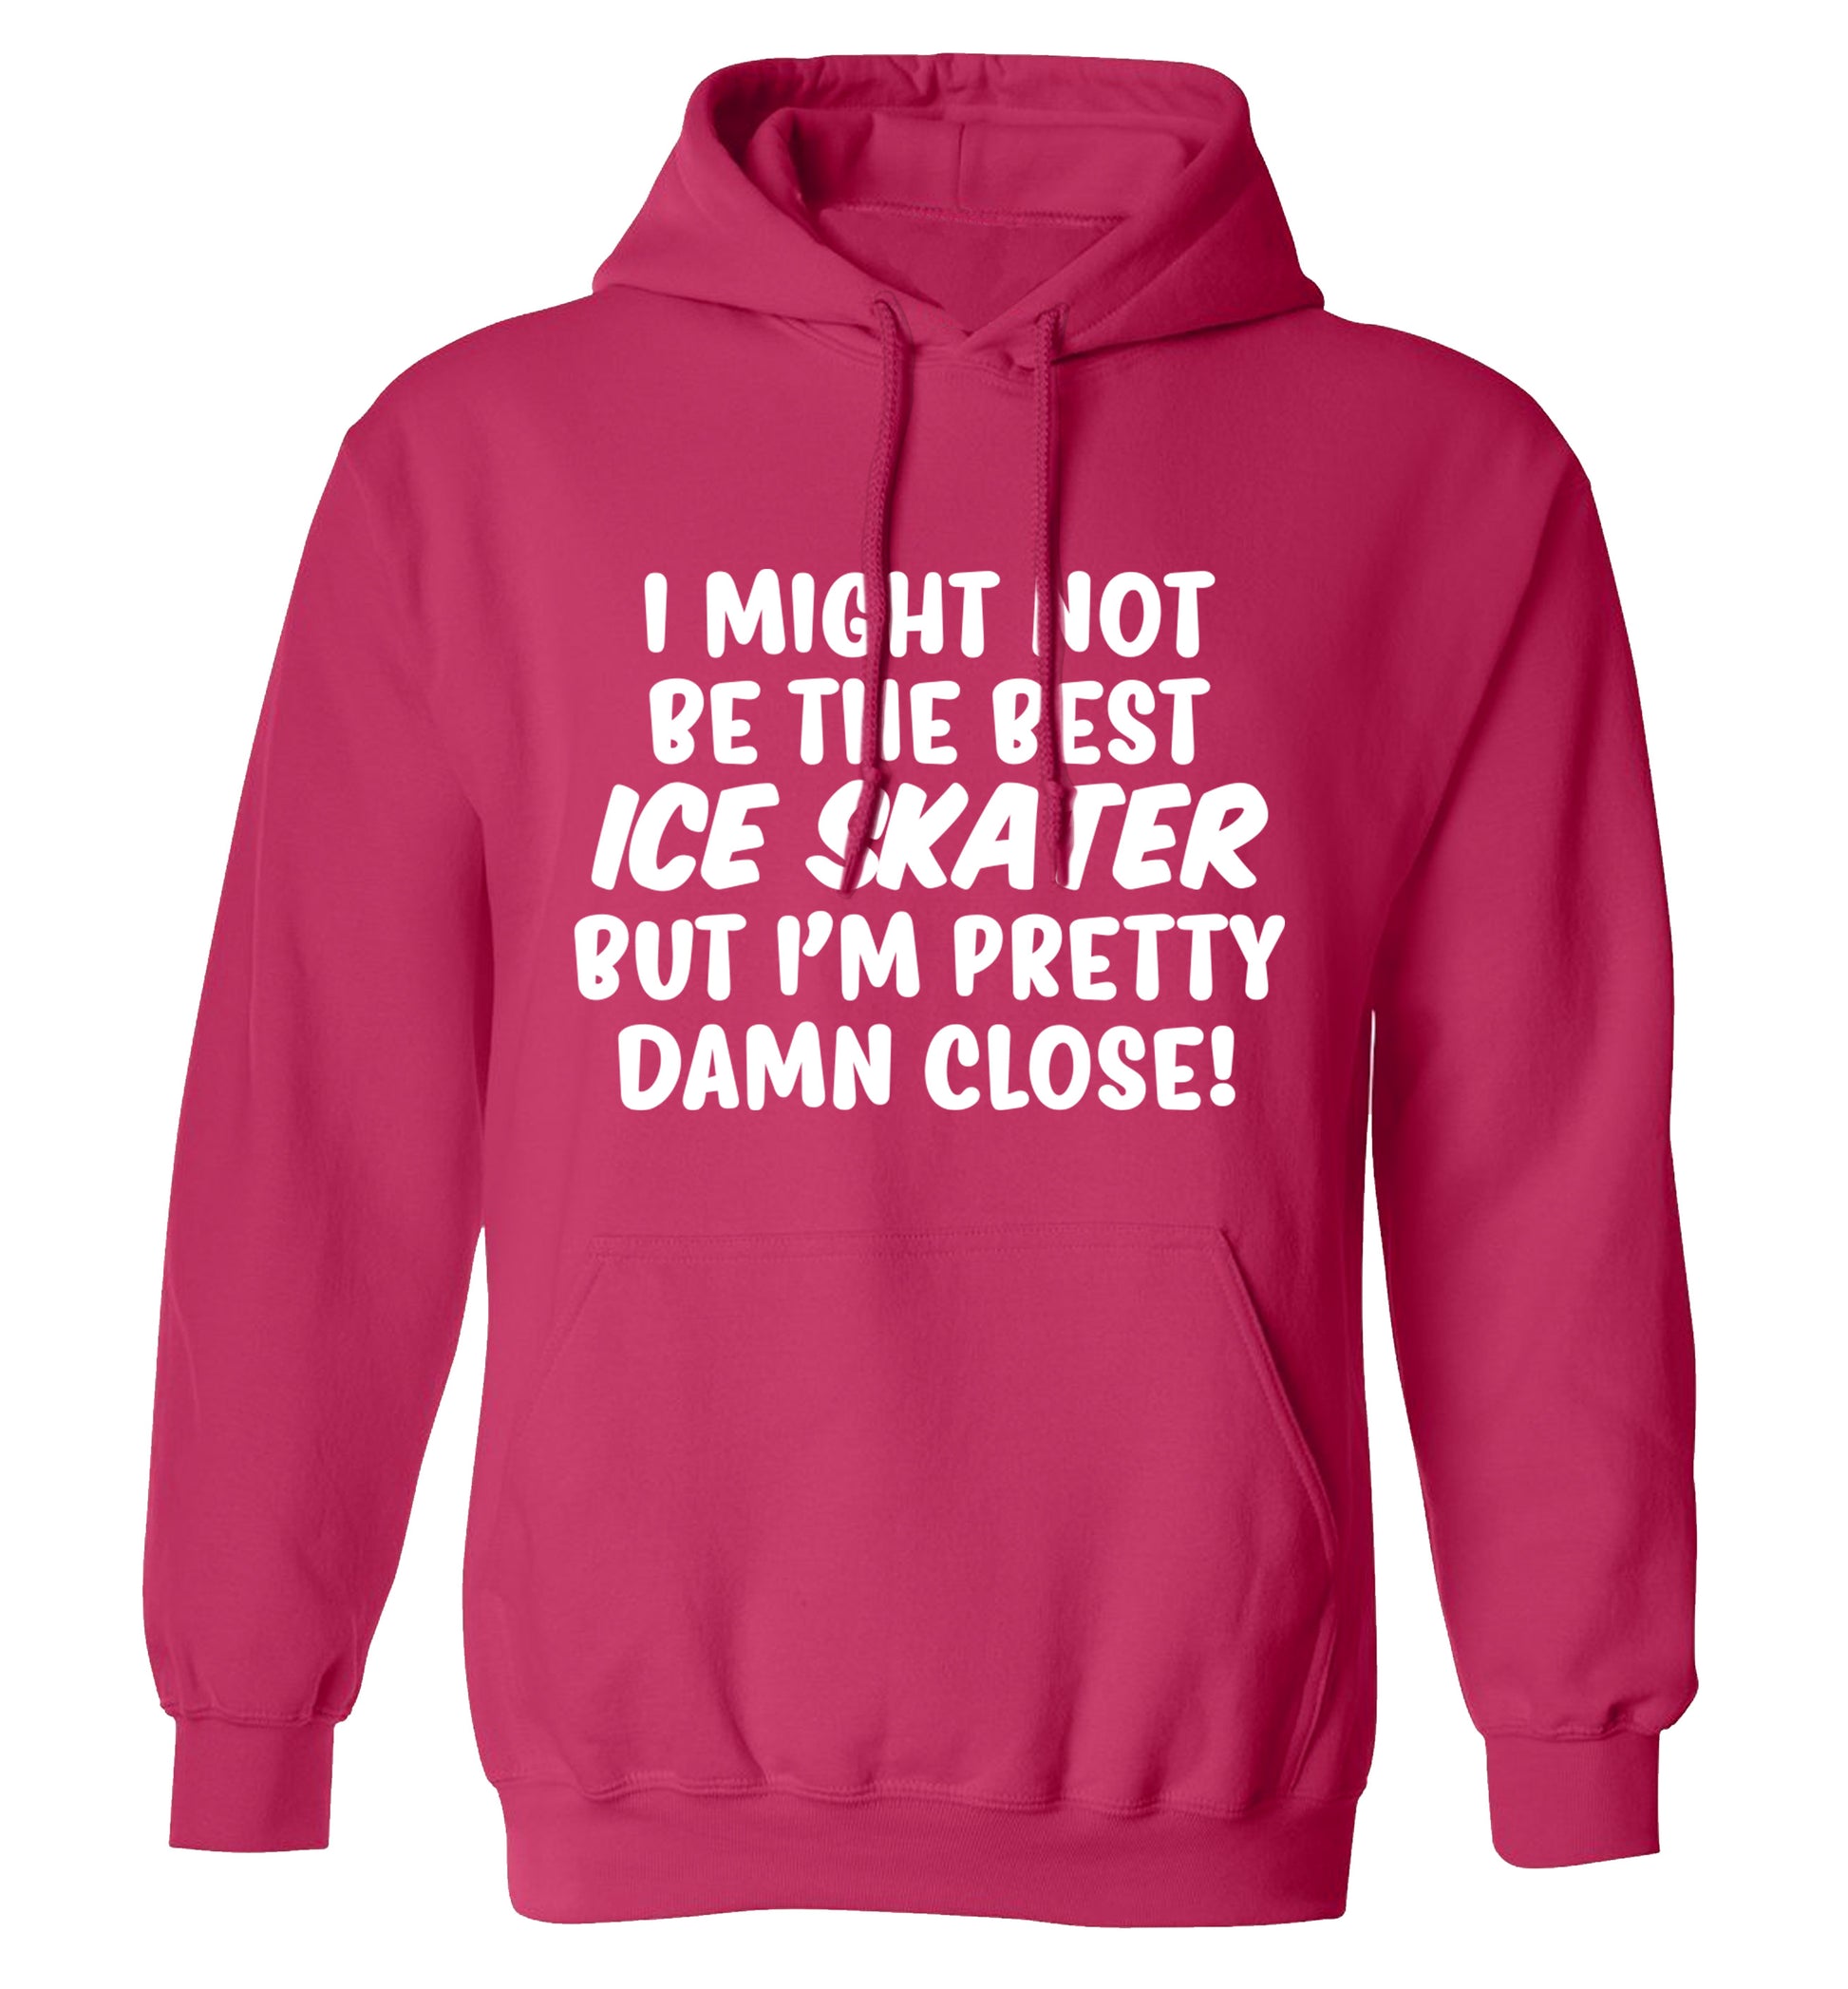 I might not be the best ice skater but I'm pretty damn close! adults unisexpink hoodie 2XL